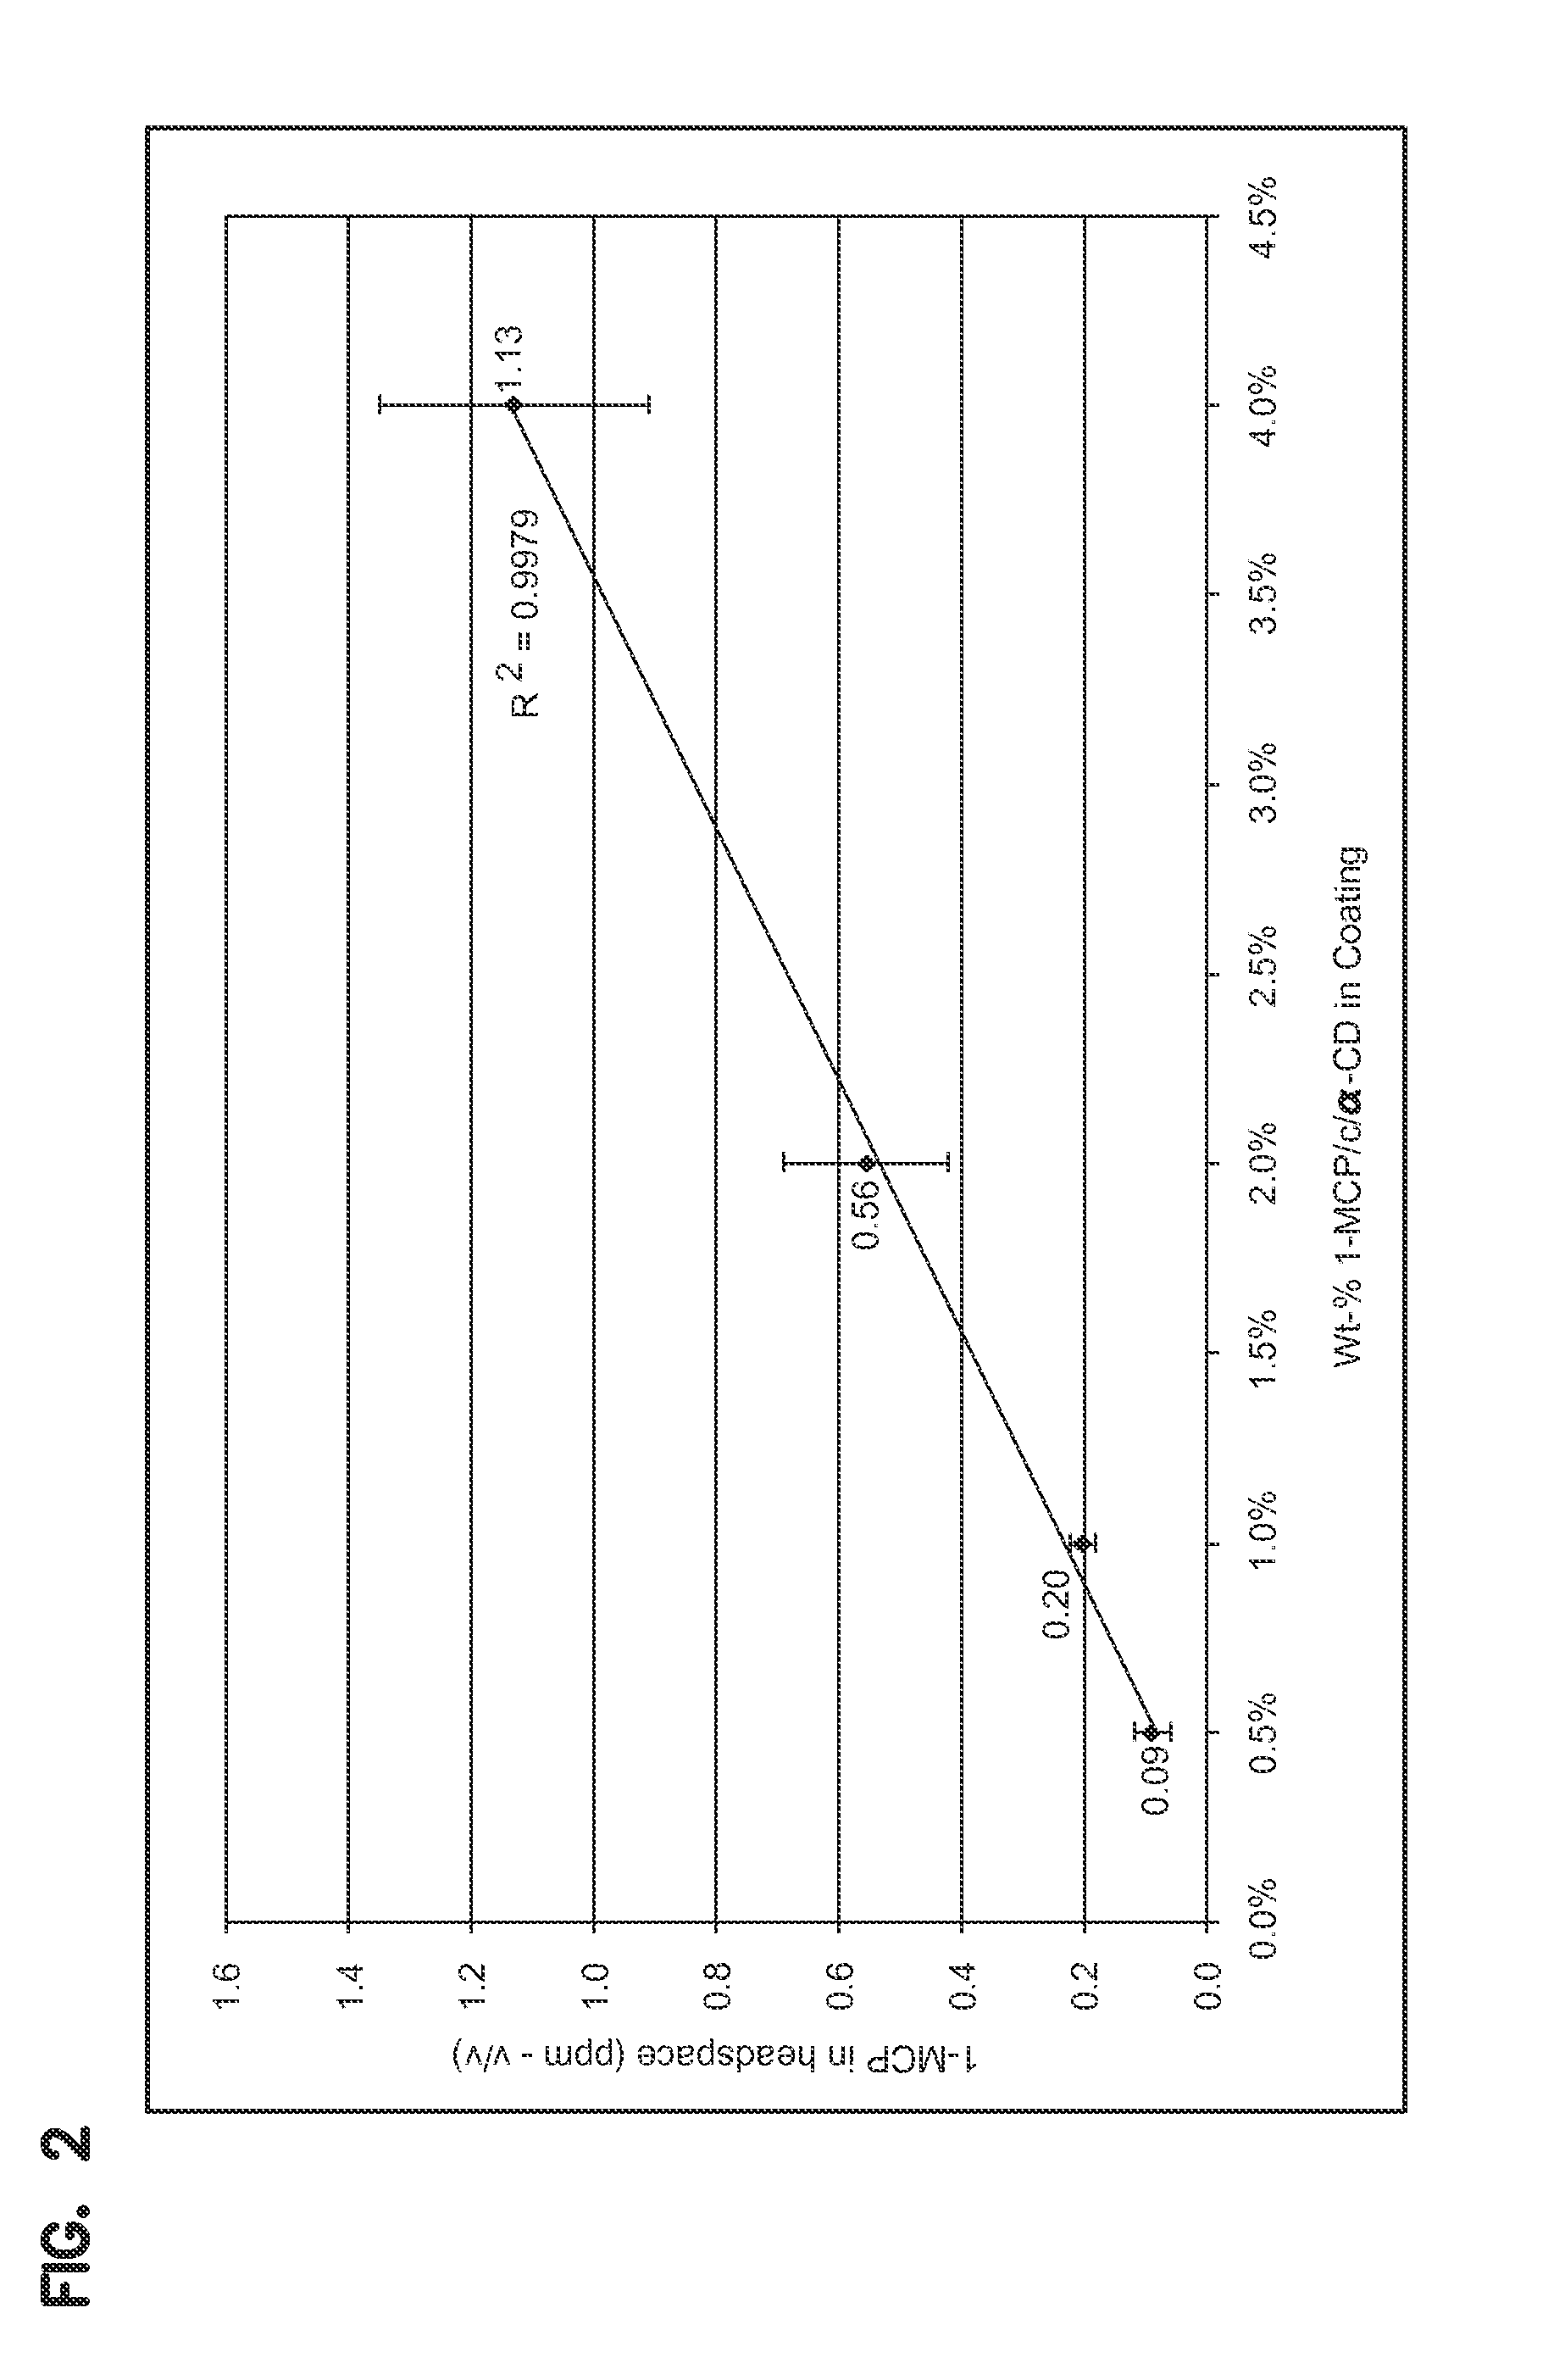 Cyclodextrin compositions, articles, and methods